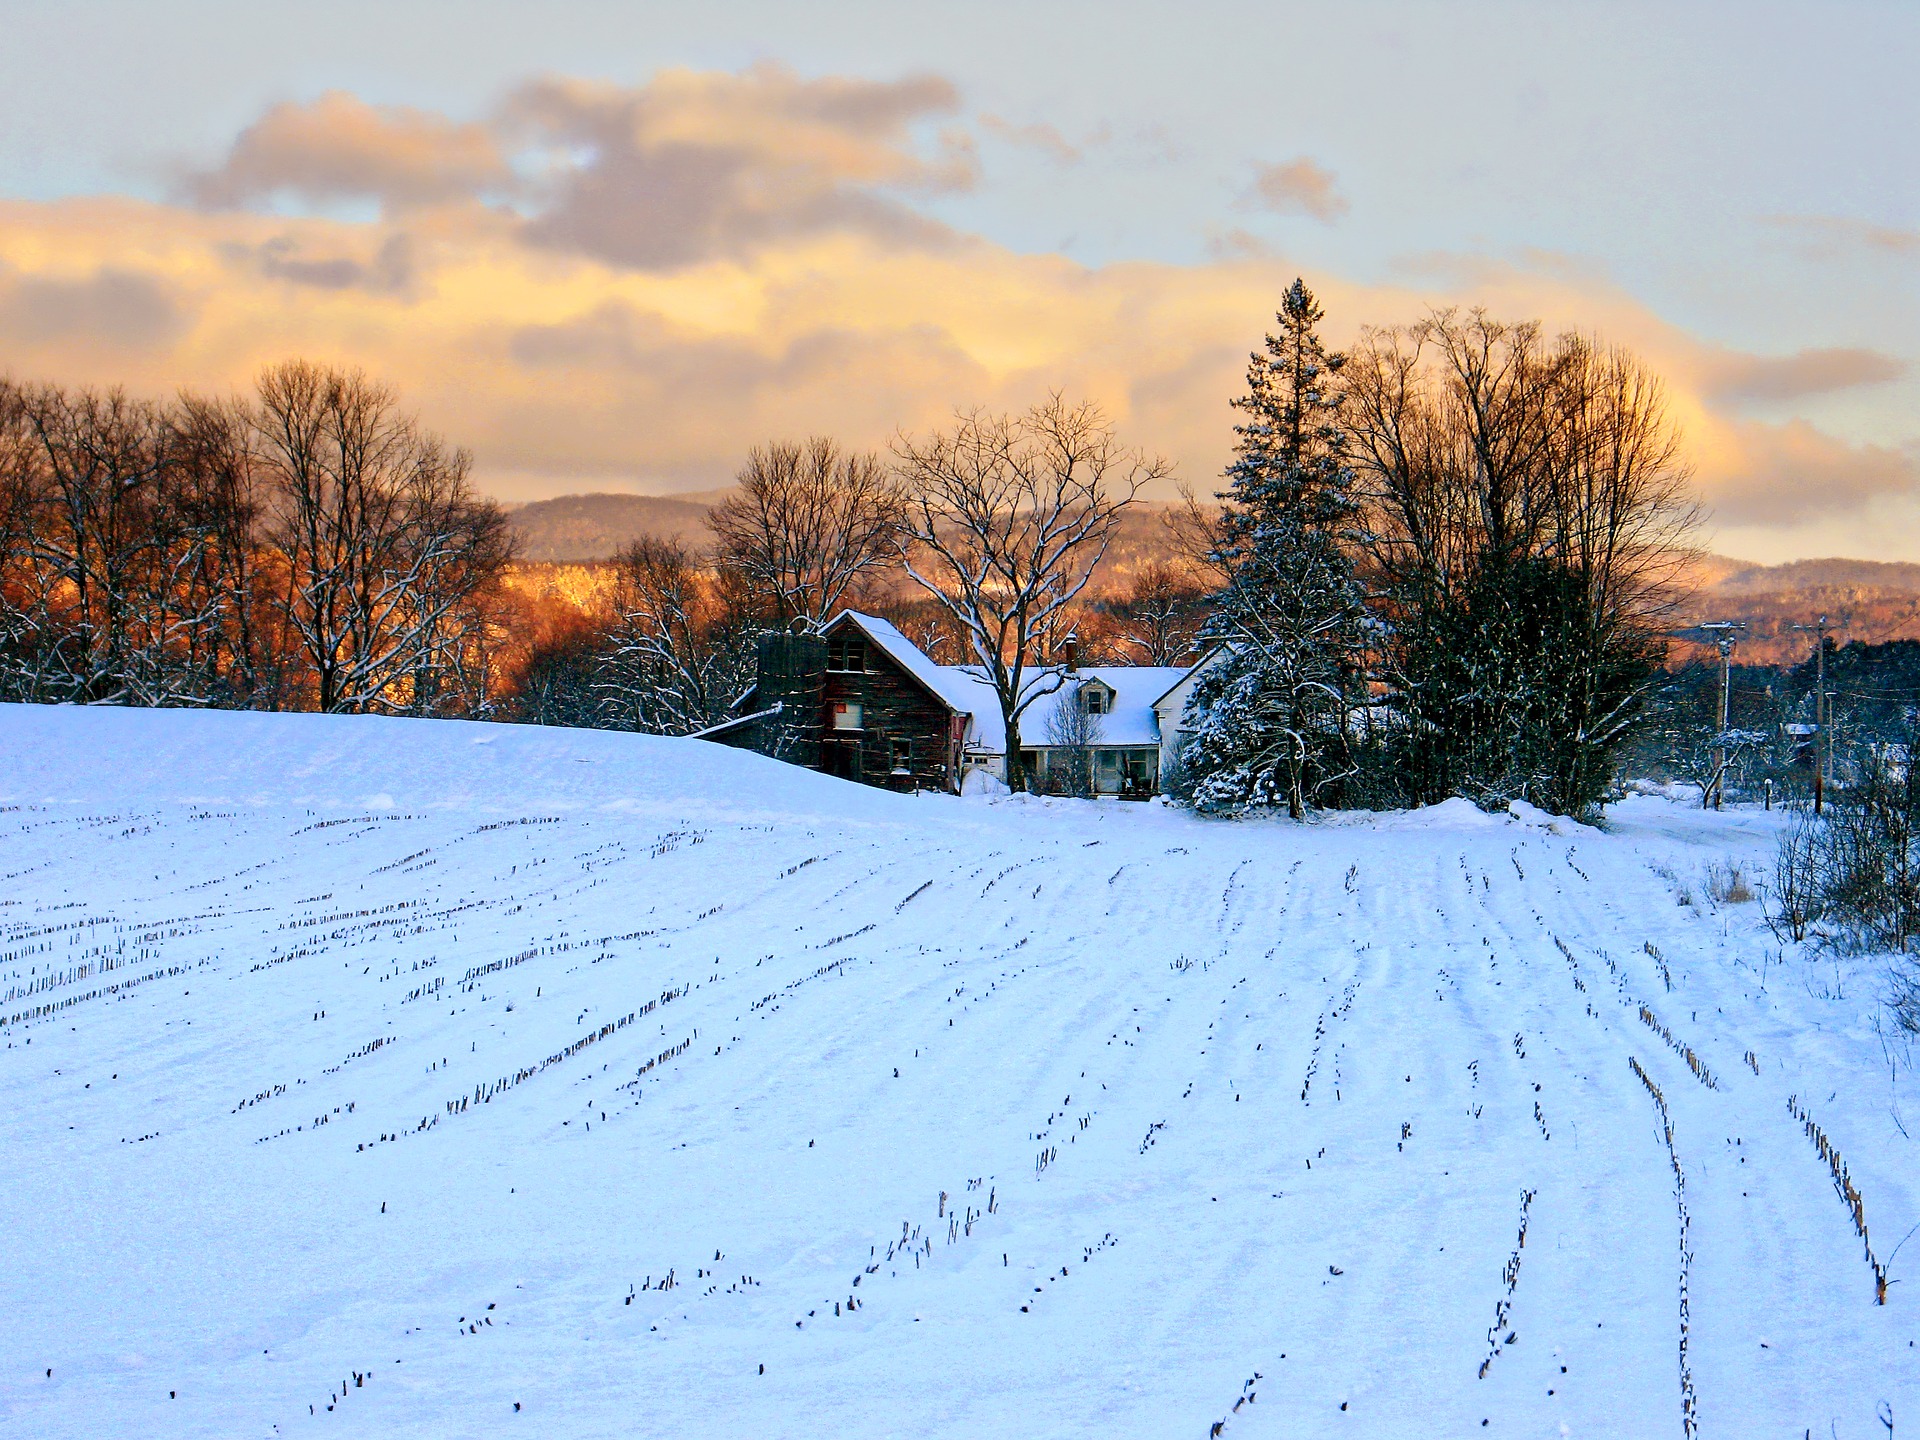 Snowy field in front of house in New England